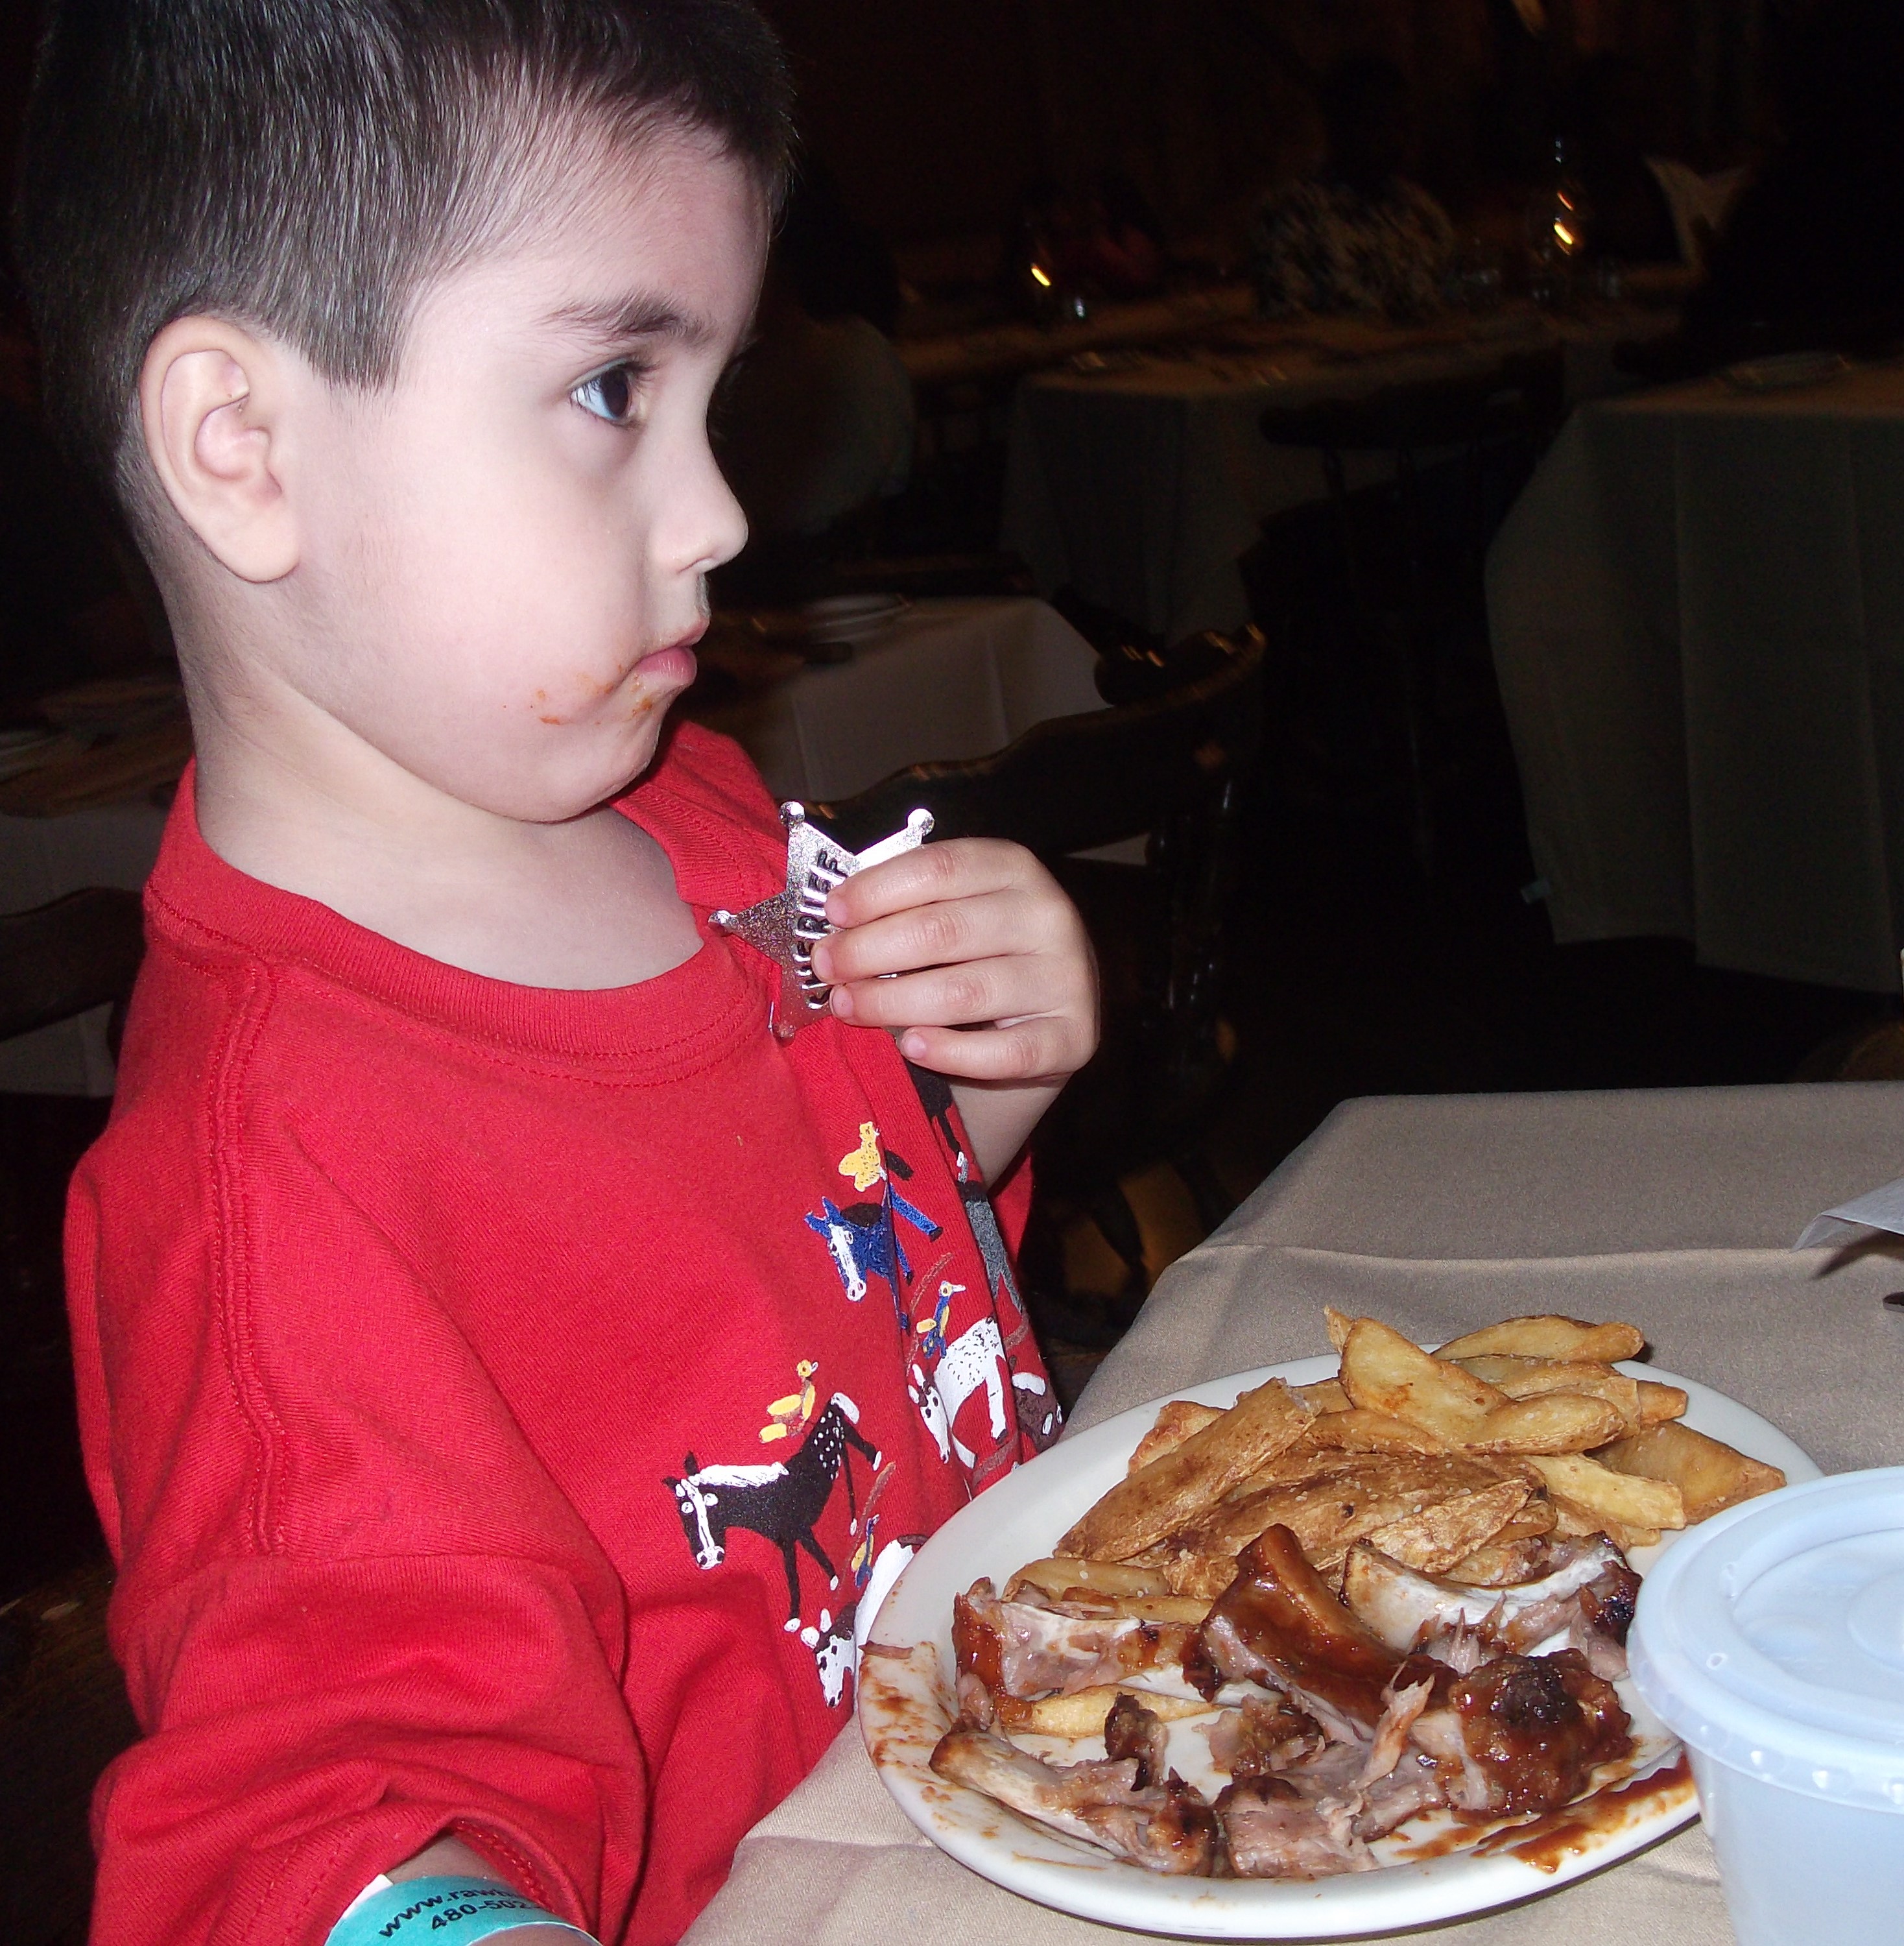 Connor had one of his favorite foods- ribs. He also got a sheriff's badge. I don't remember what I ate; I'm sure it was steak. I do remember that it was good though.